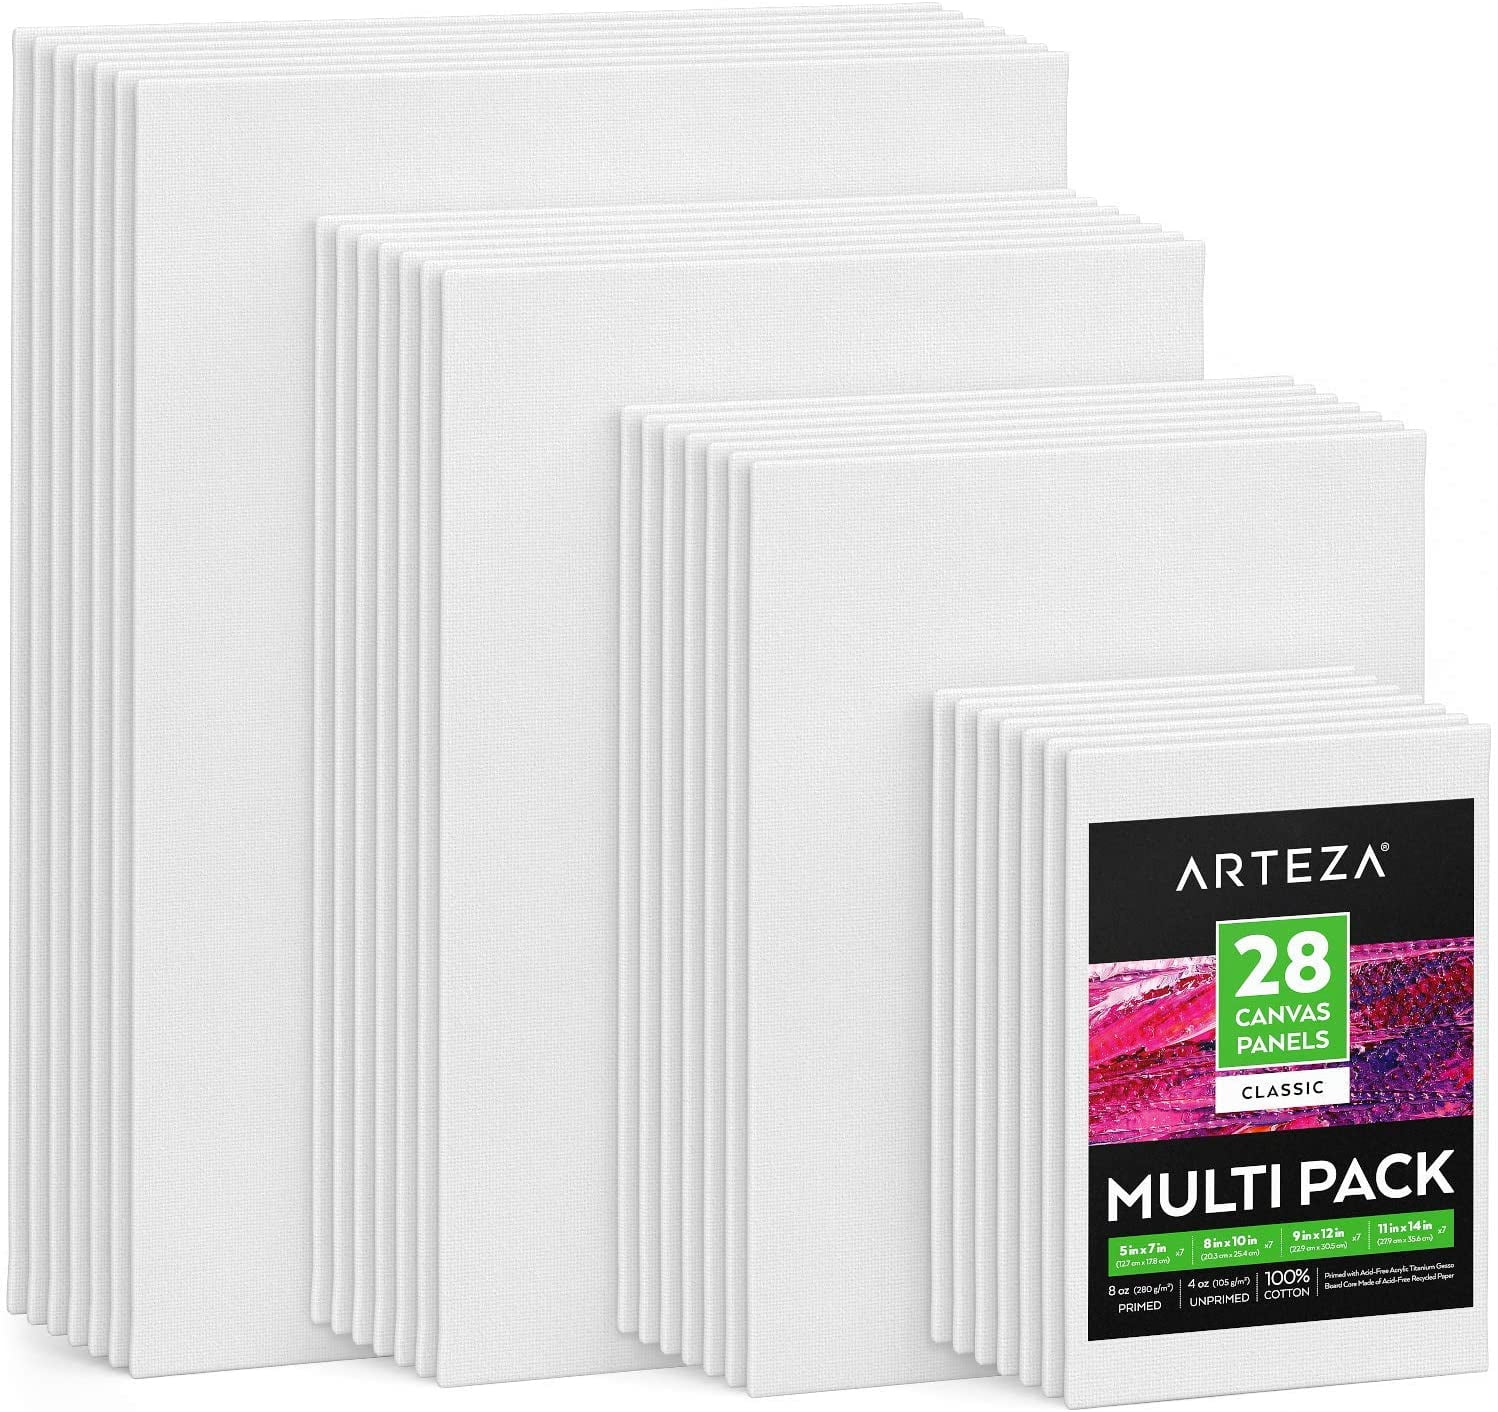  Arteza Paint Canvases for Painting, Pack of 6, 24 x 30 Inches,  Blank White Stretched Canvas Bulk, 100% Cotton, 8 oz Gesso-Primed, Art  Supplies for Adults and Teens, Acrylic Pouring and Oil Painting